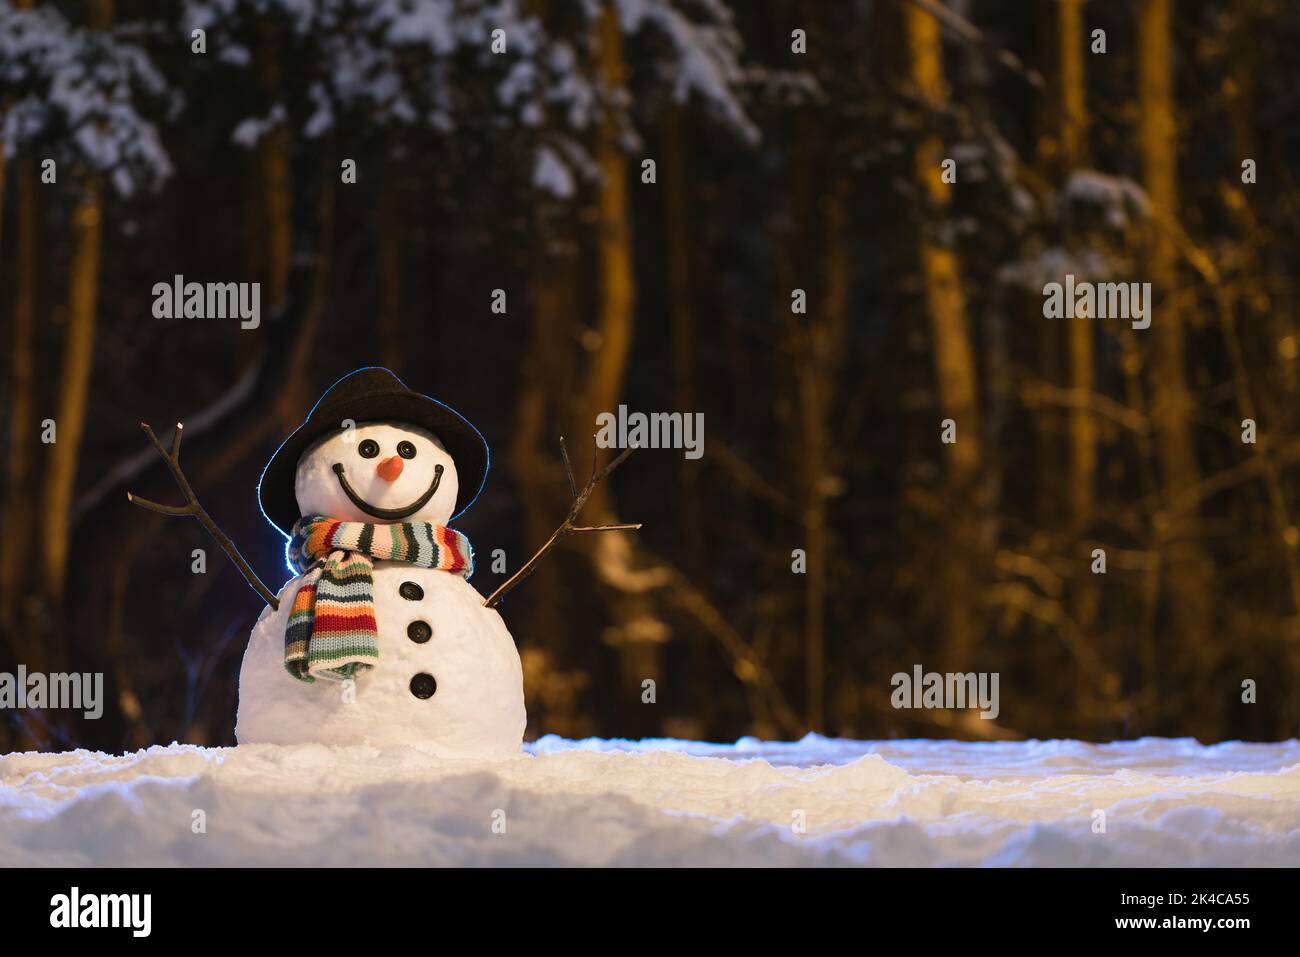 Festive background with a cheerful snowman on a dark background in the evening park Stock Photo